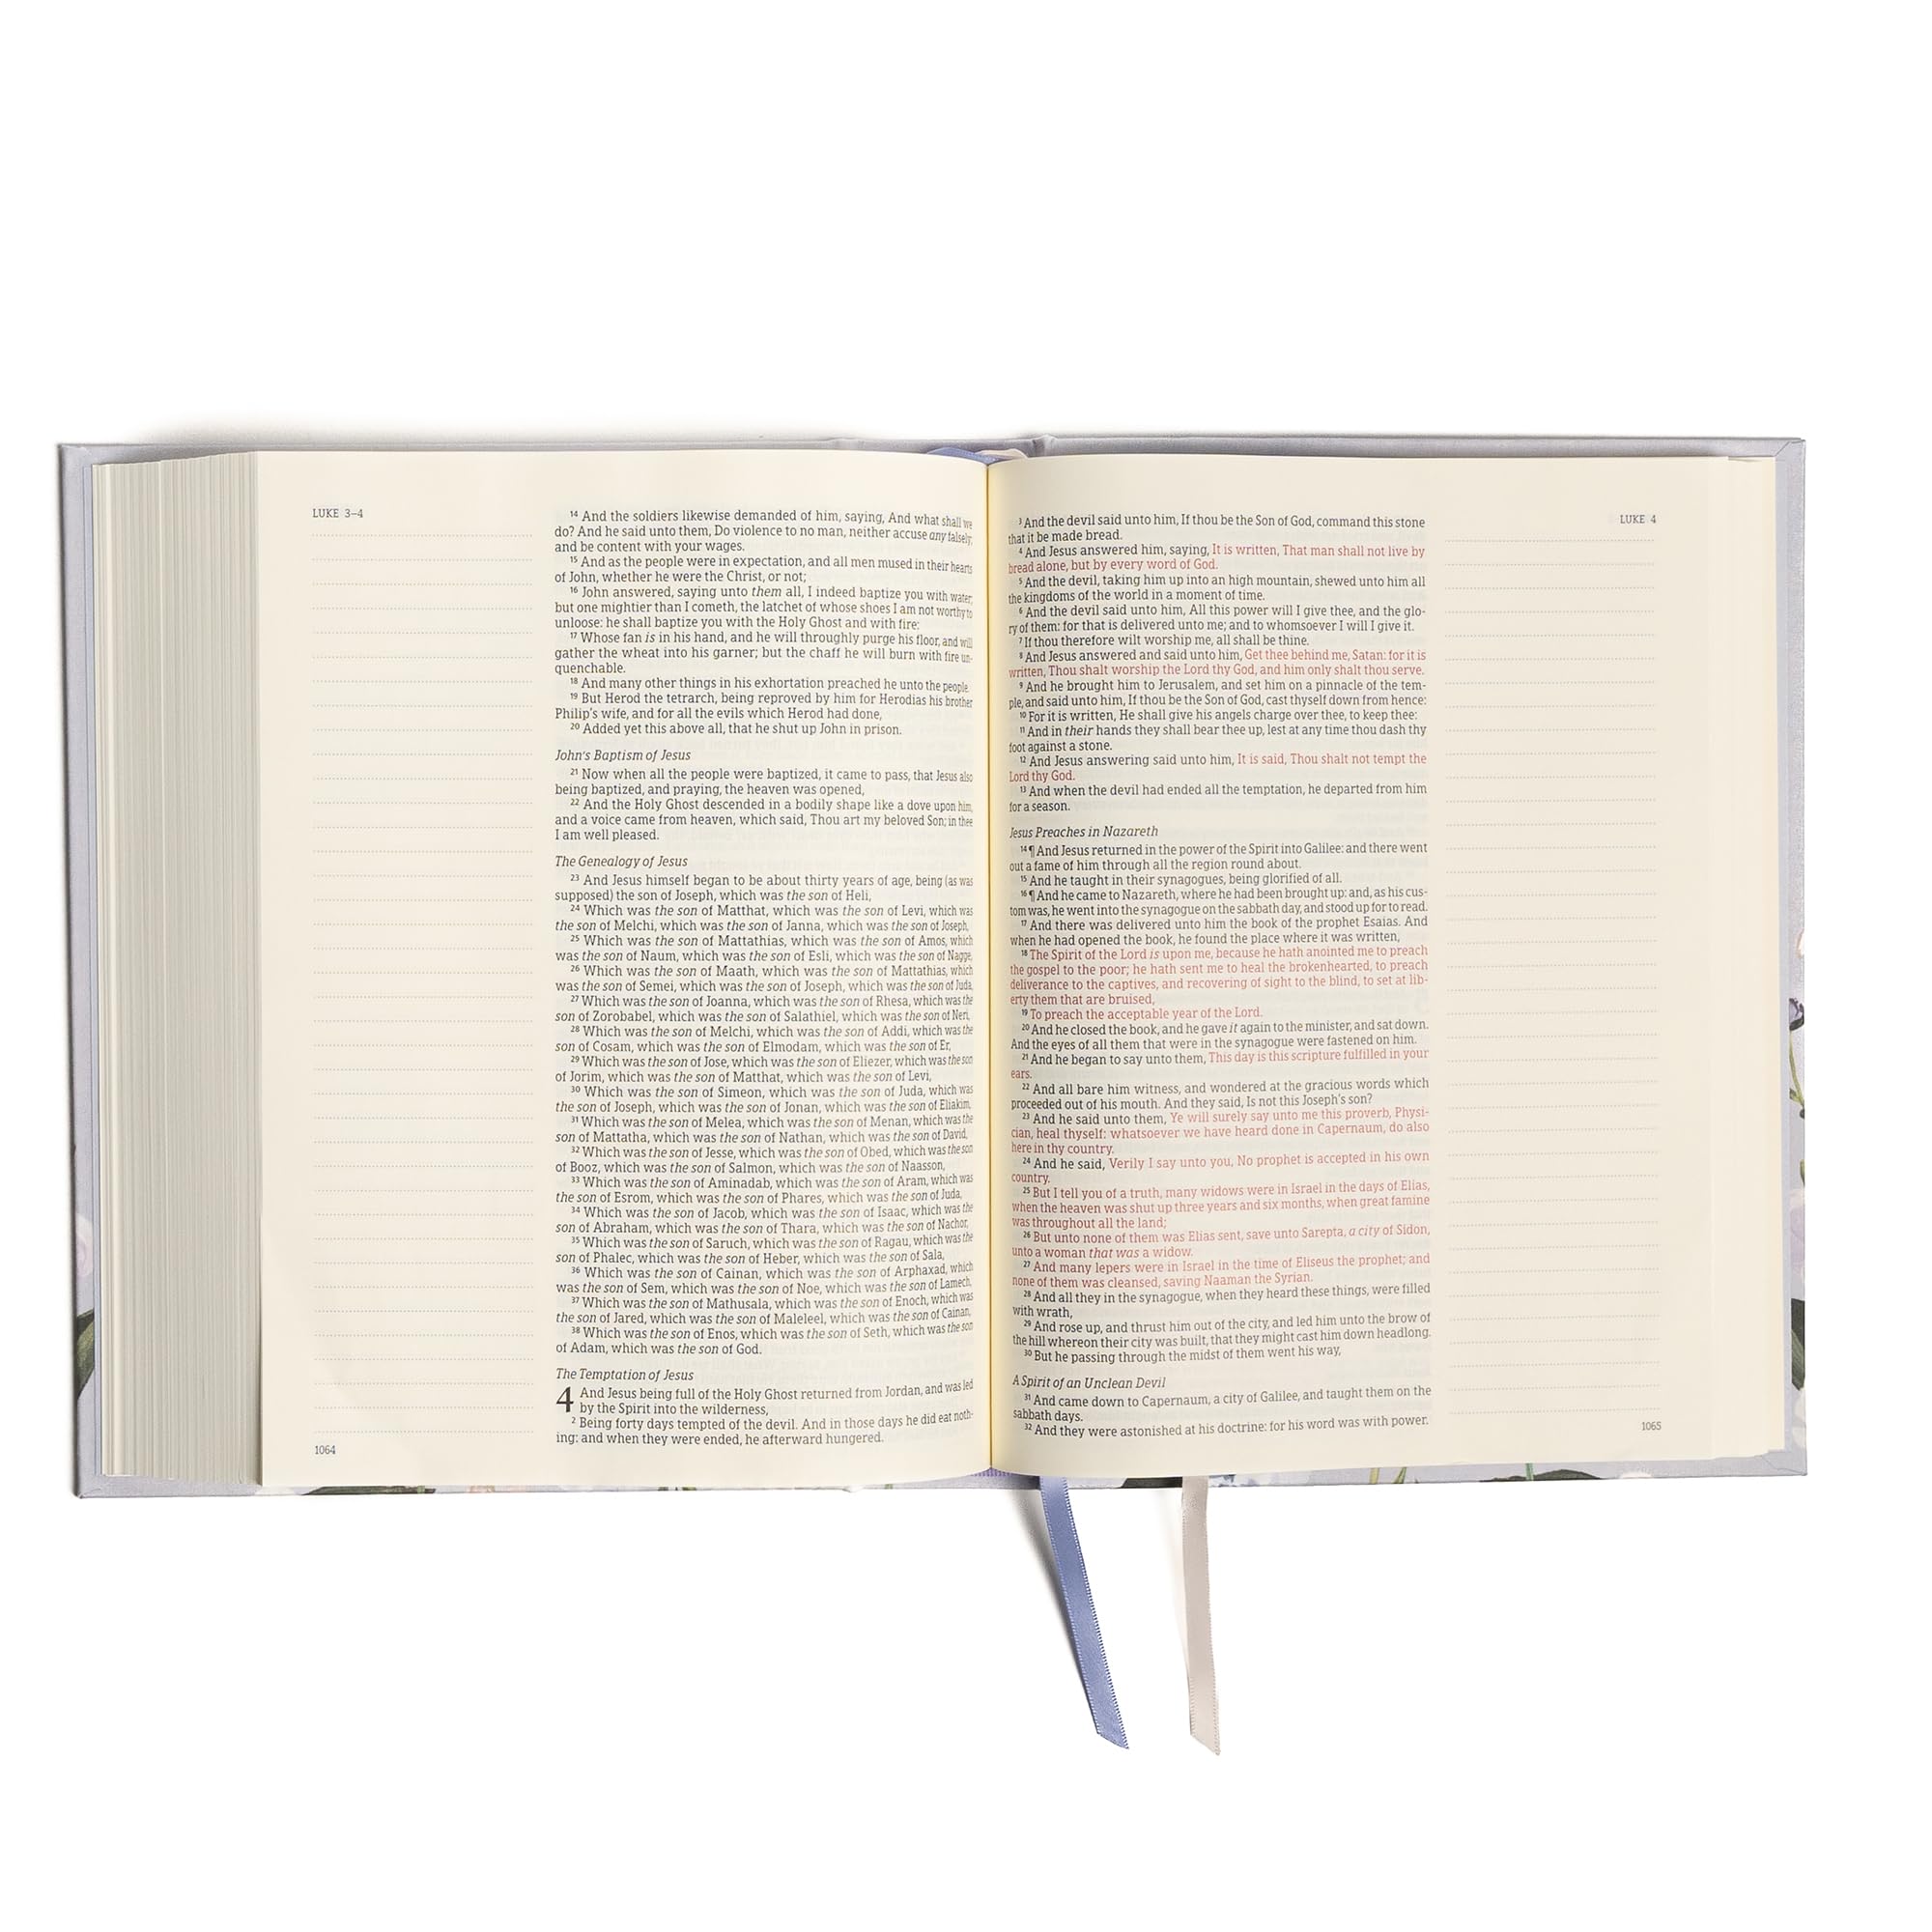 CSB Notetaking Bible, Large Print Hosanna Revival Edition, Lavender/Peach Cloth-Over-Board, Black Letter, Single-Column, Journaling Space, Reading Plan, Easy-to-Read Bible Serif Type